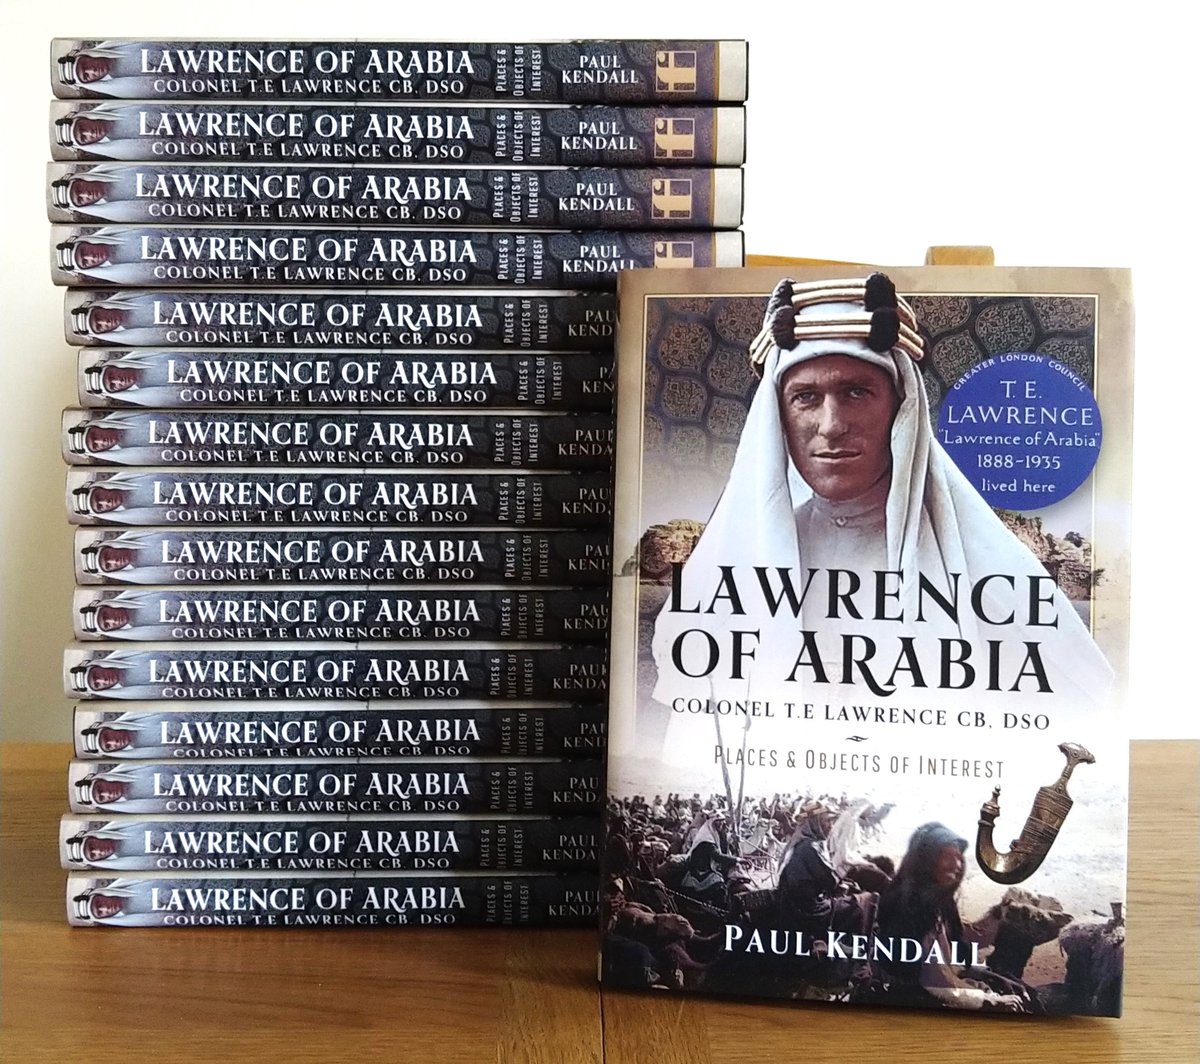 Lawrence of Arabia: Places and Objects of Interest’. 20% discount of RRPS if bought in 🇬🇧from @penswordbooks. buff.ly/47pzpSM Available with 10% discount in 🇬🇧 at @AmazonUK amazon.co.uk/Lawrence-Arabi… Available for preorder in 🇺🇸 on @amazon amazon.com/Lawrence-Arabi…